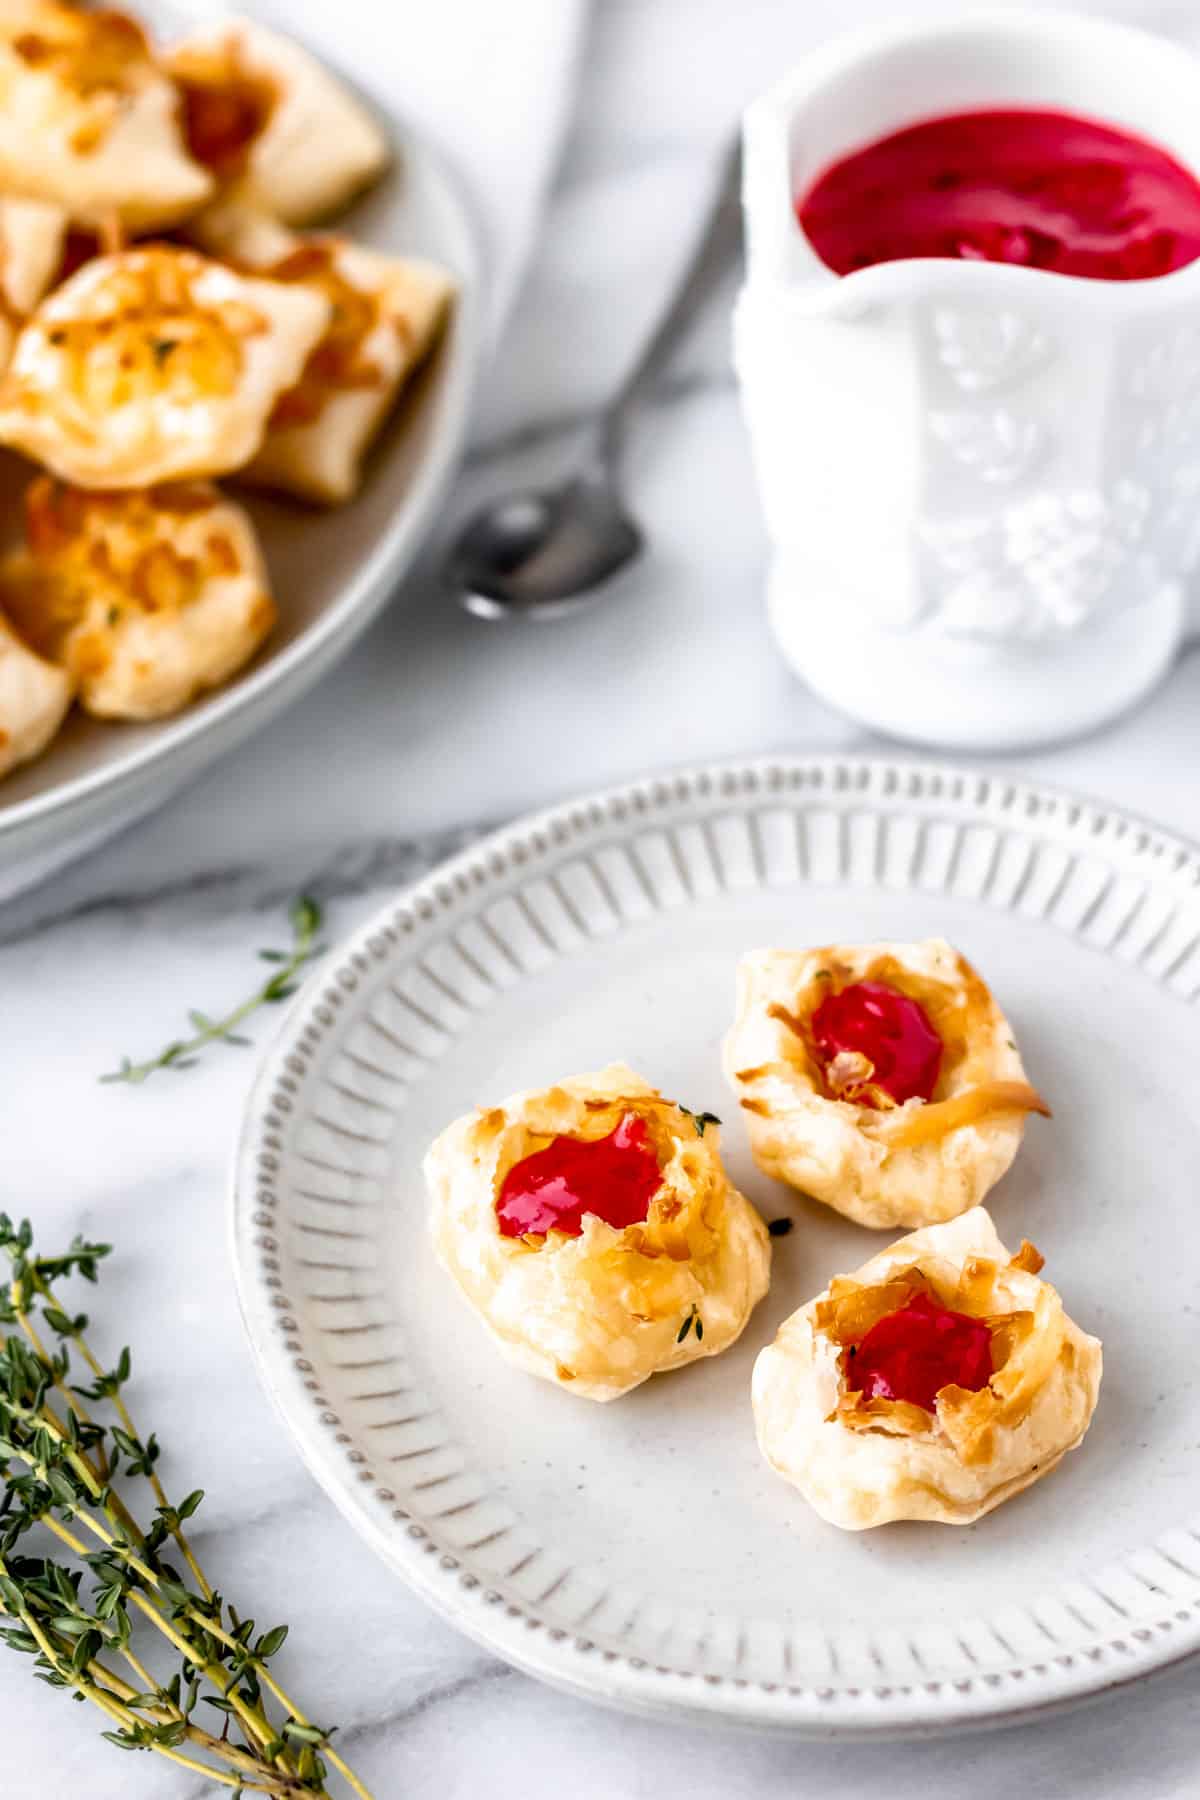 Three cheese puffs with raspberry sauce on a small white plate with a second plate of Gruyere cheese puffs, a pitcher of raspberry sauce and a spoon in the background.